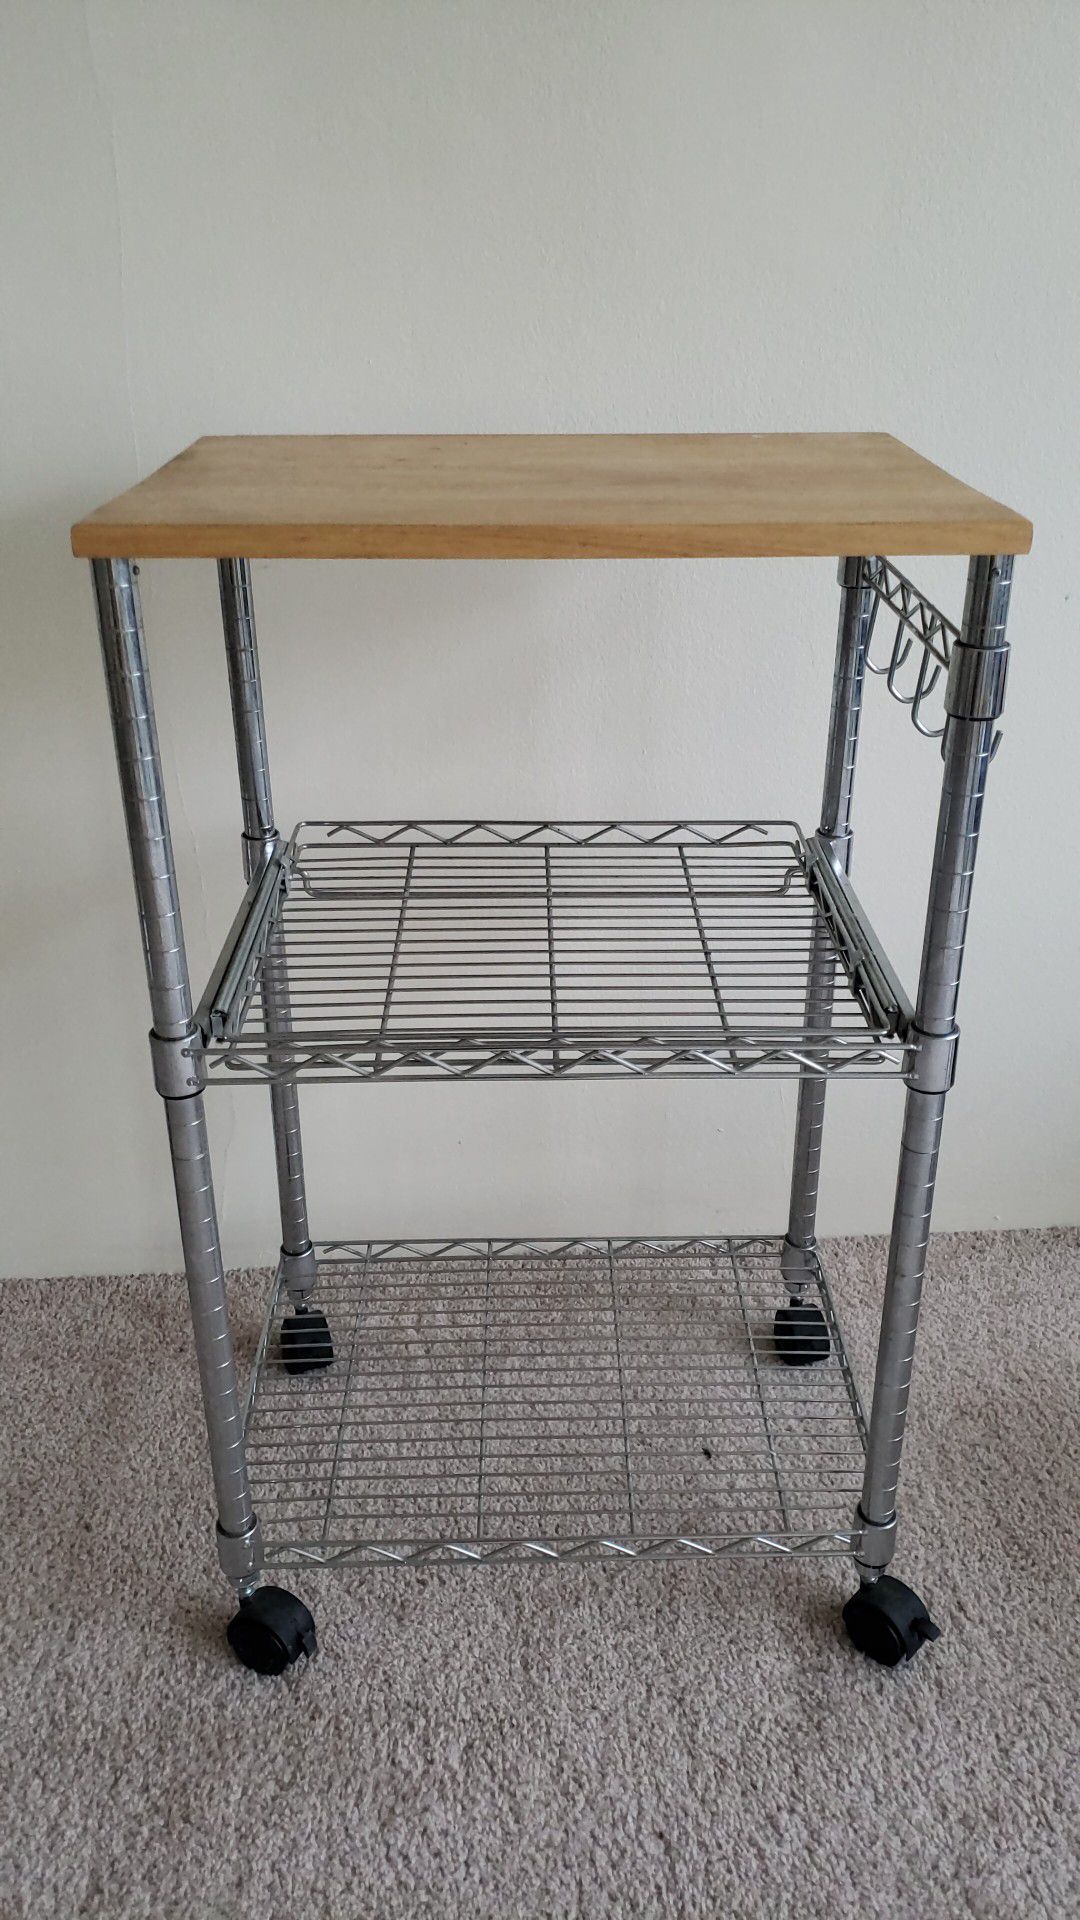 Kitchen cart with Wood Top